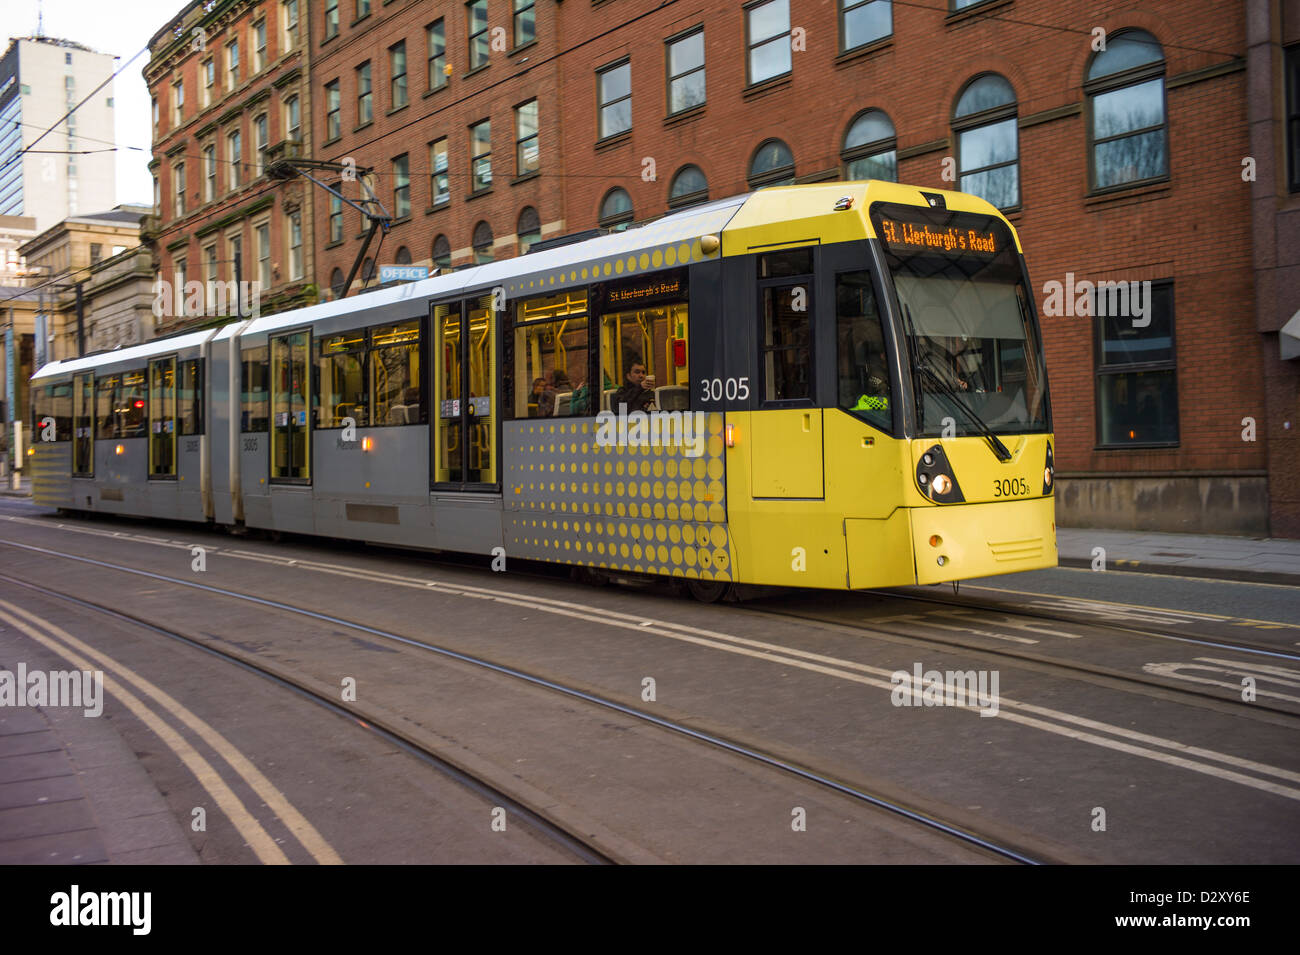 Manchester Metrolink tram proche St Peters Square Station, Manchester Banque D'Images